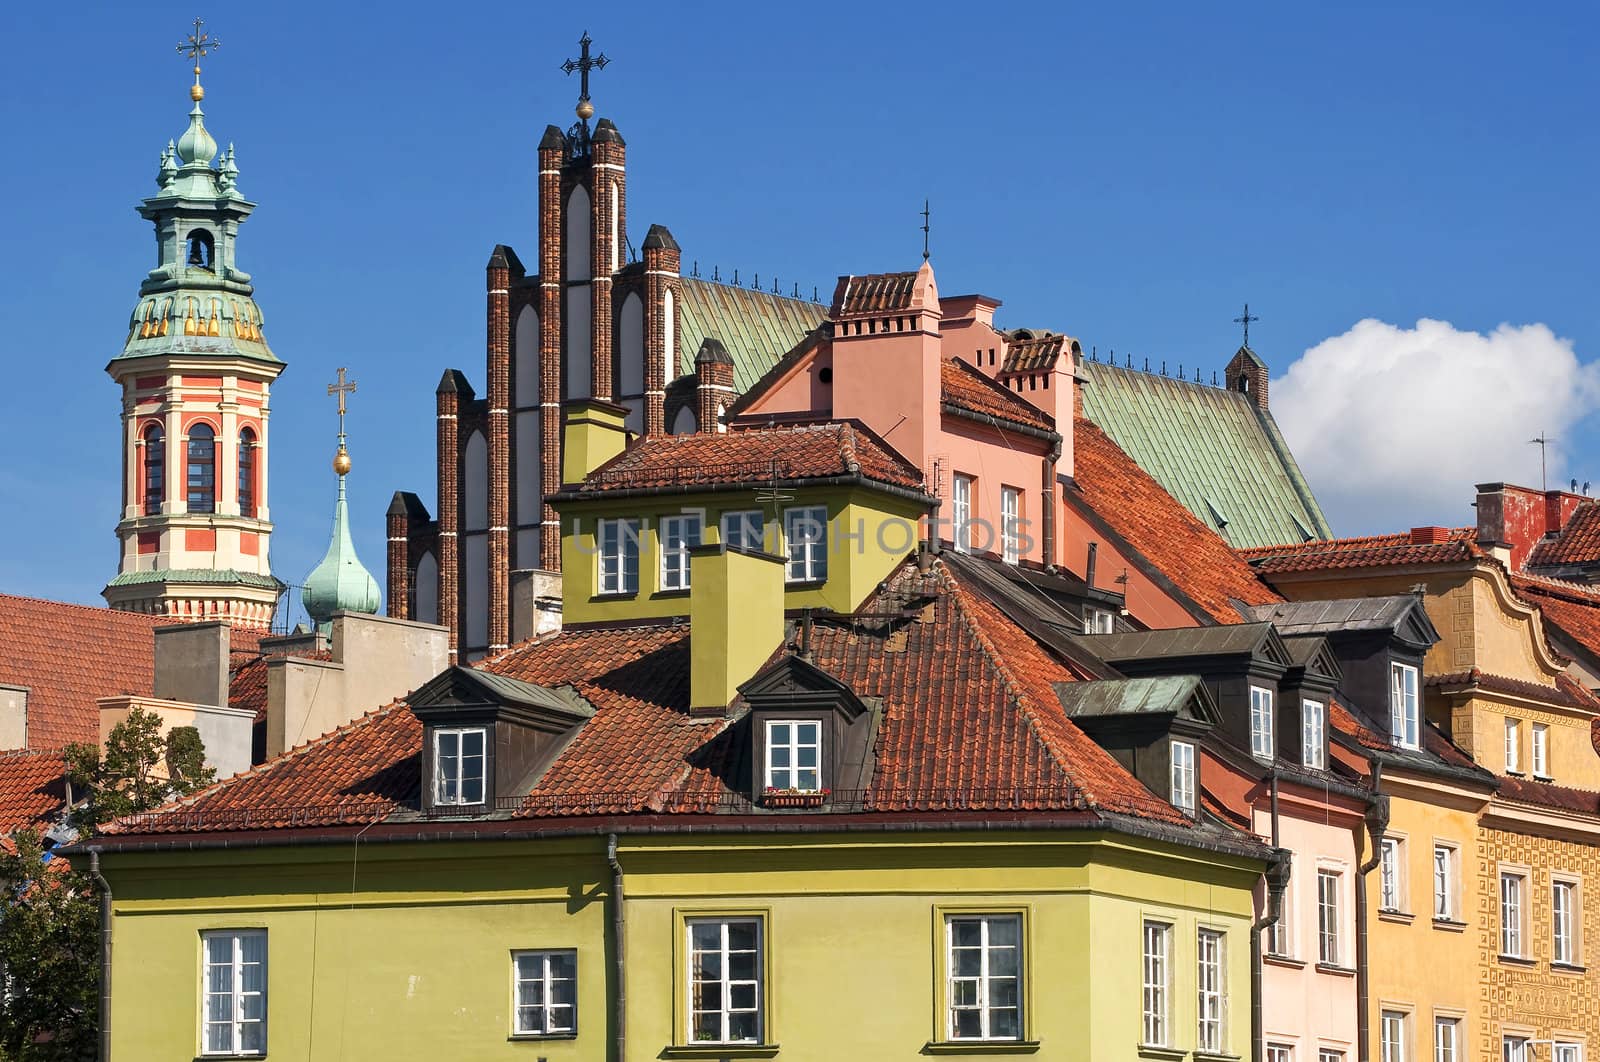 Houses and churches in the Old Town of Warsaw, Poland.